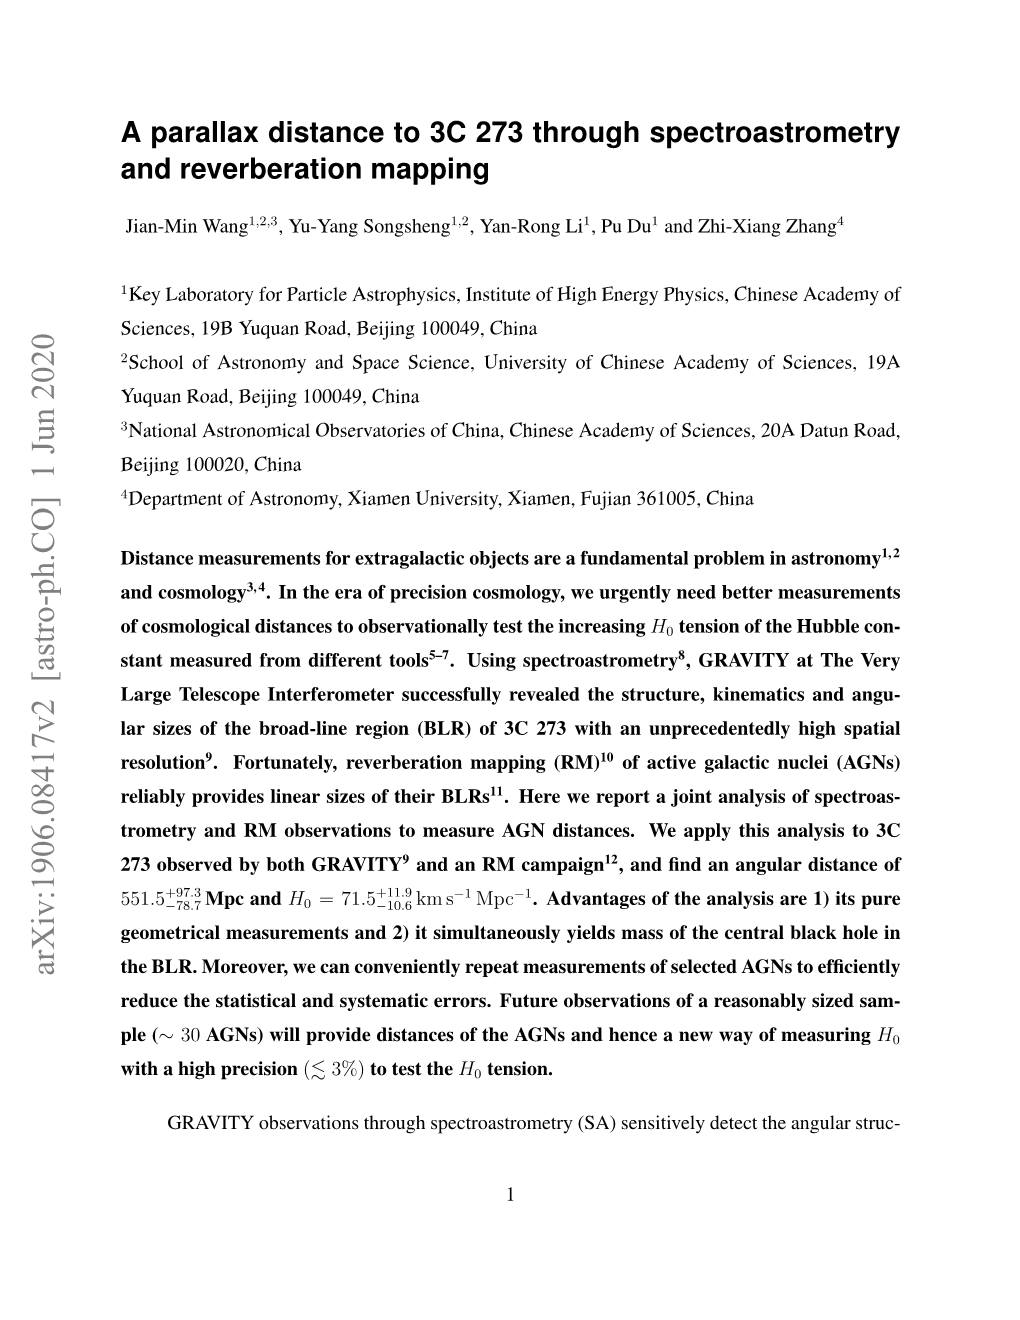 A Parallax Distance to 3C 273 Through Spectroastrometry and Reverberation Mapping